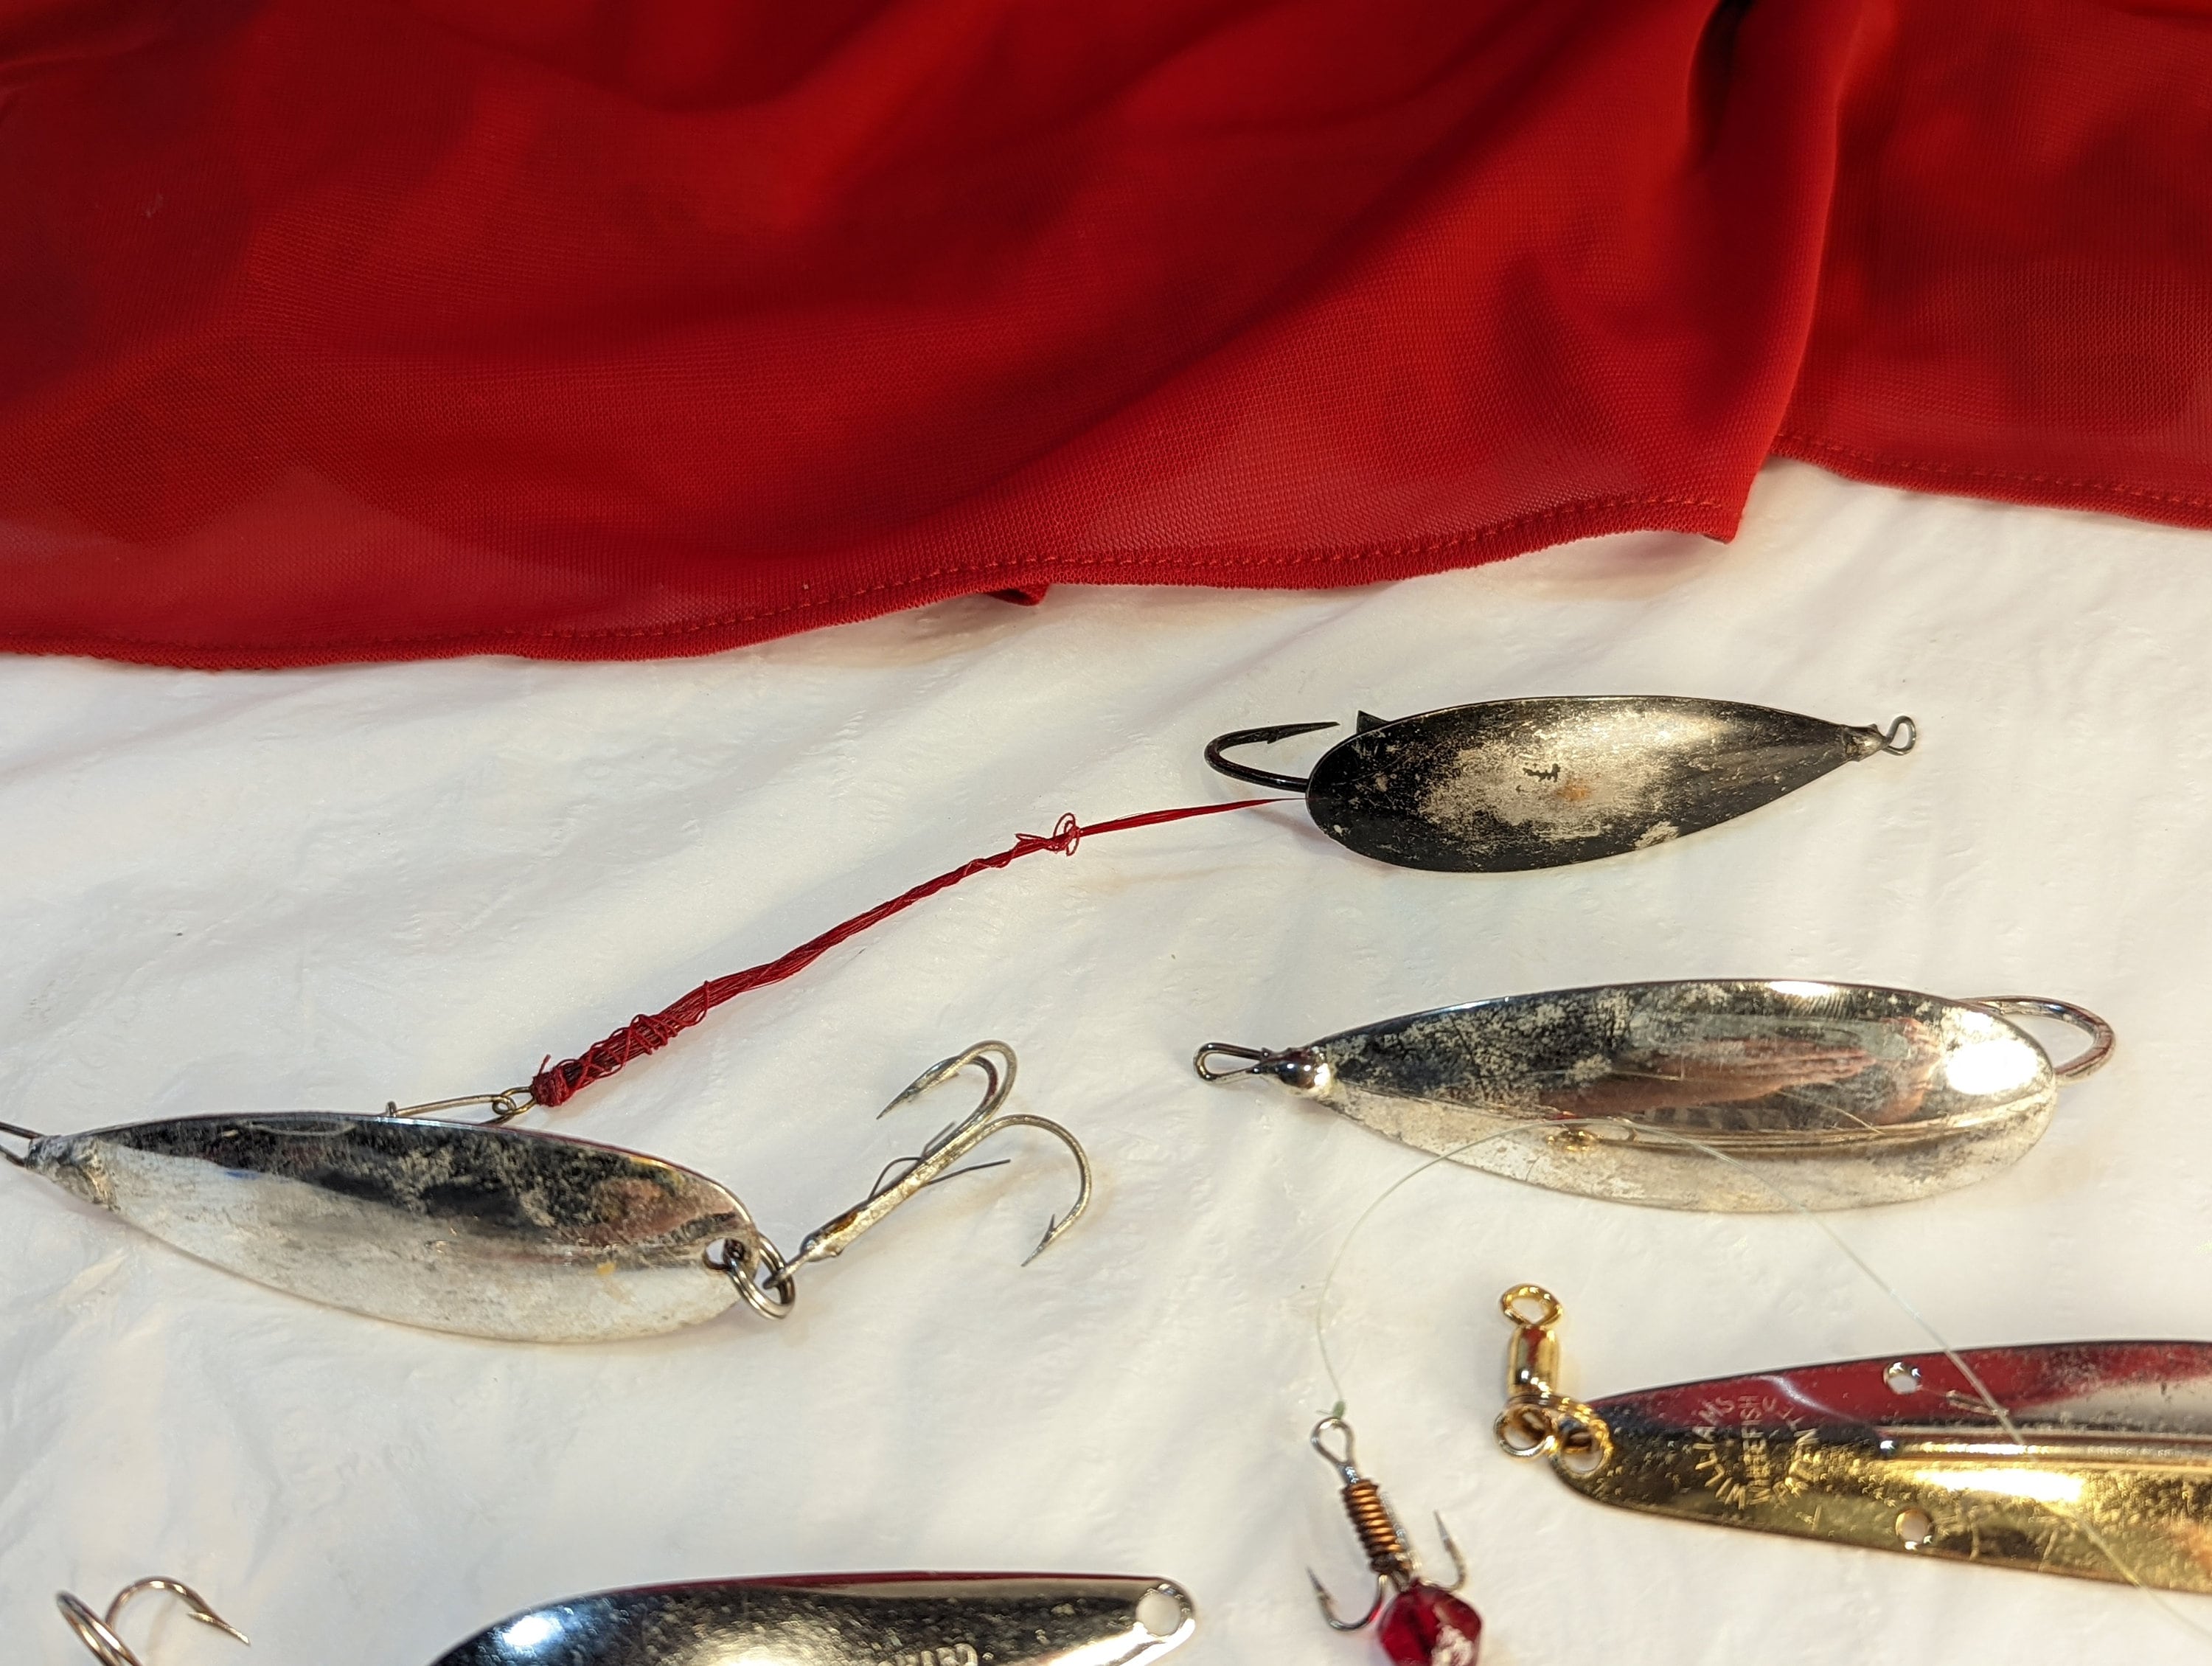 Mann's All Freshwater Vintage Fishing Lures for sale